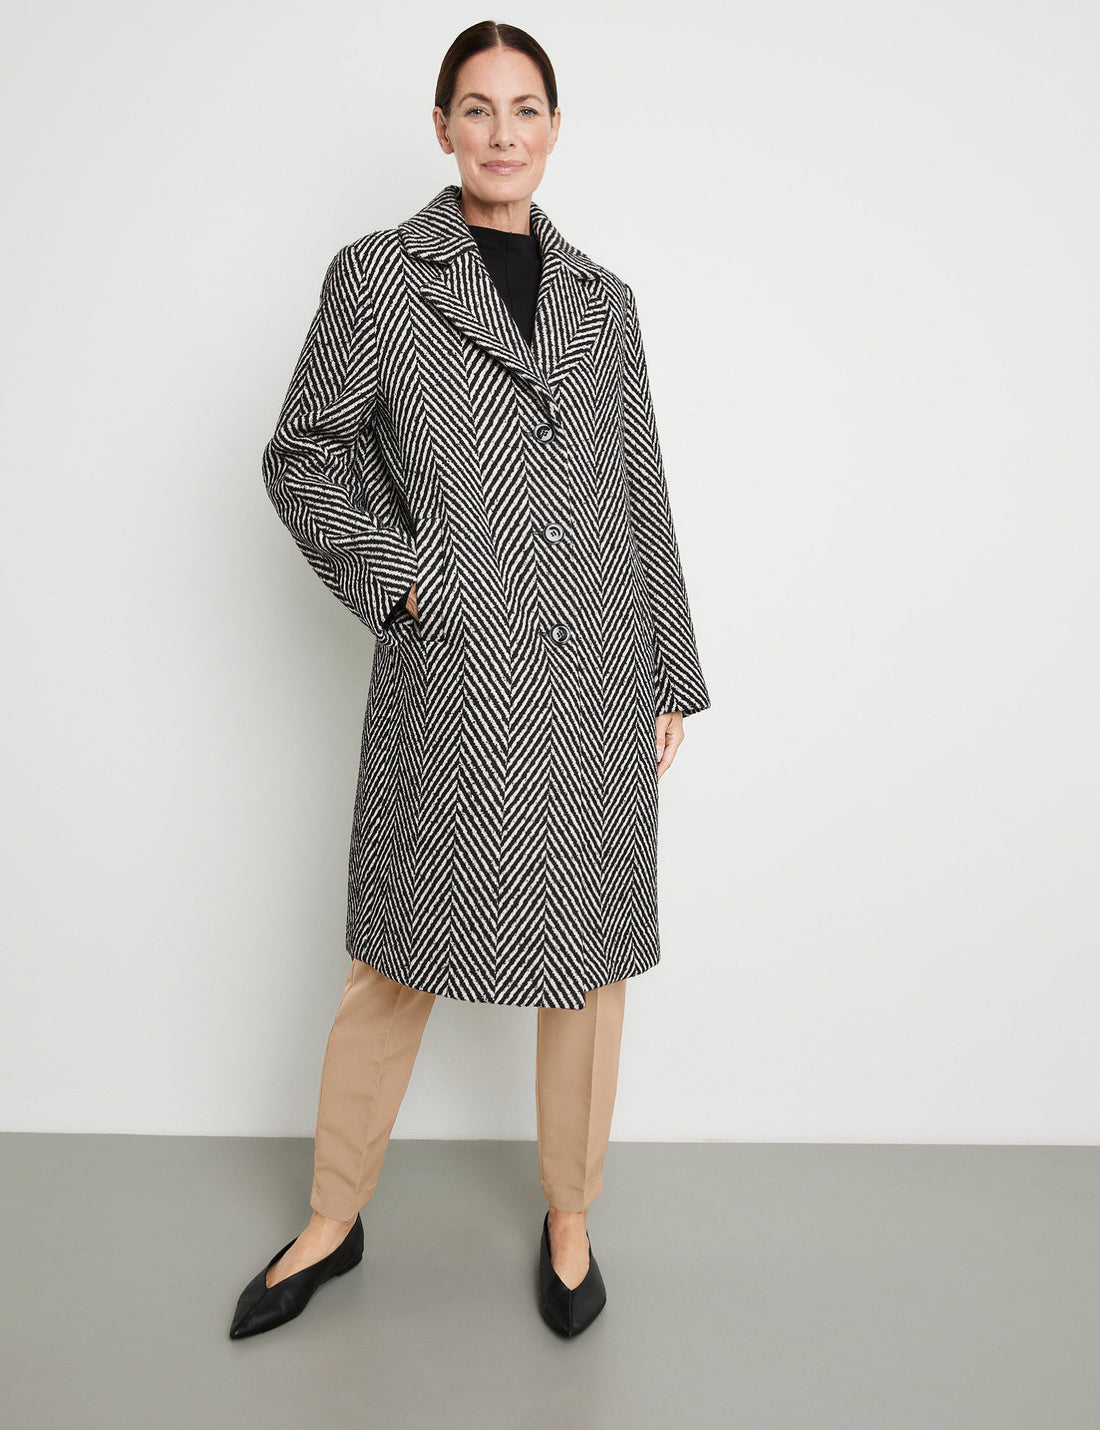 Wool Coat With A Large Lapel Collar_250016-31147_2000_01